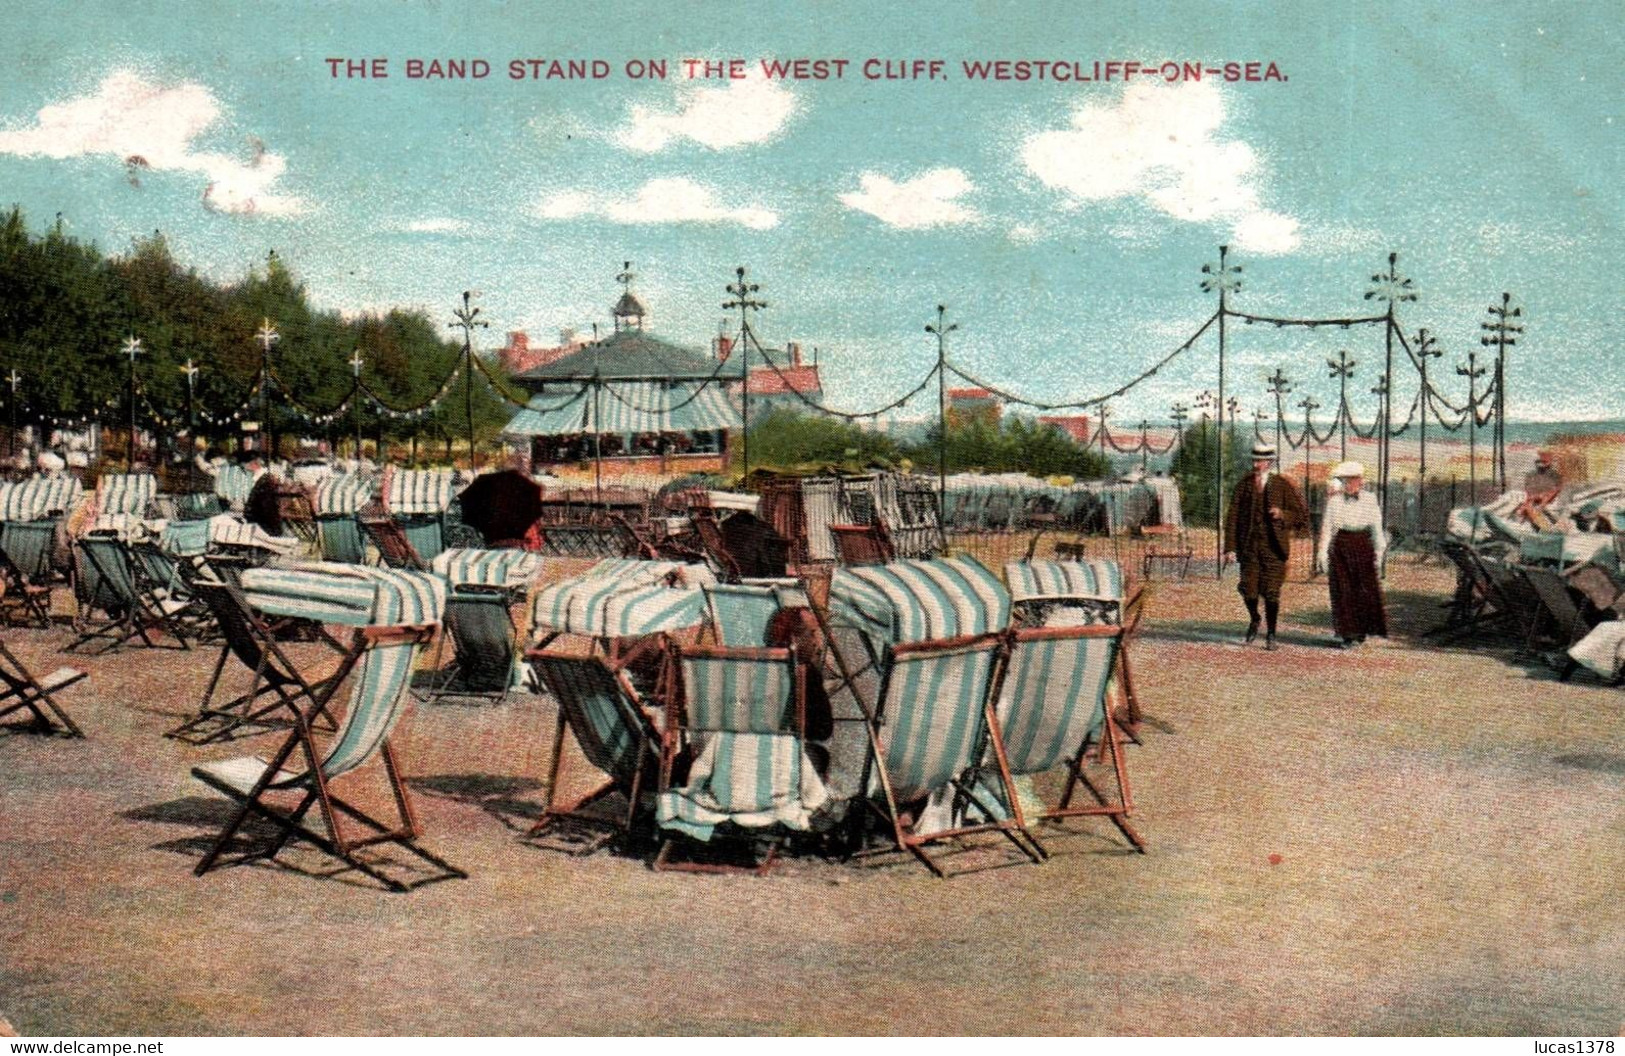 WESTCLIFF ON SEA / THE BAND STAND ON THE WESTCLIFF / NICE  CARD - Southend, Westcliff & Leigh